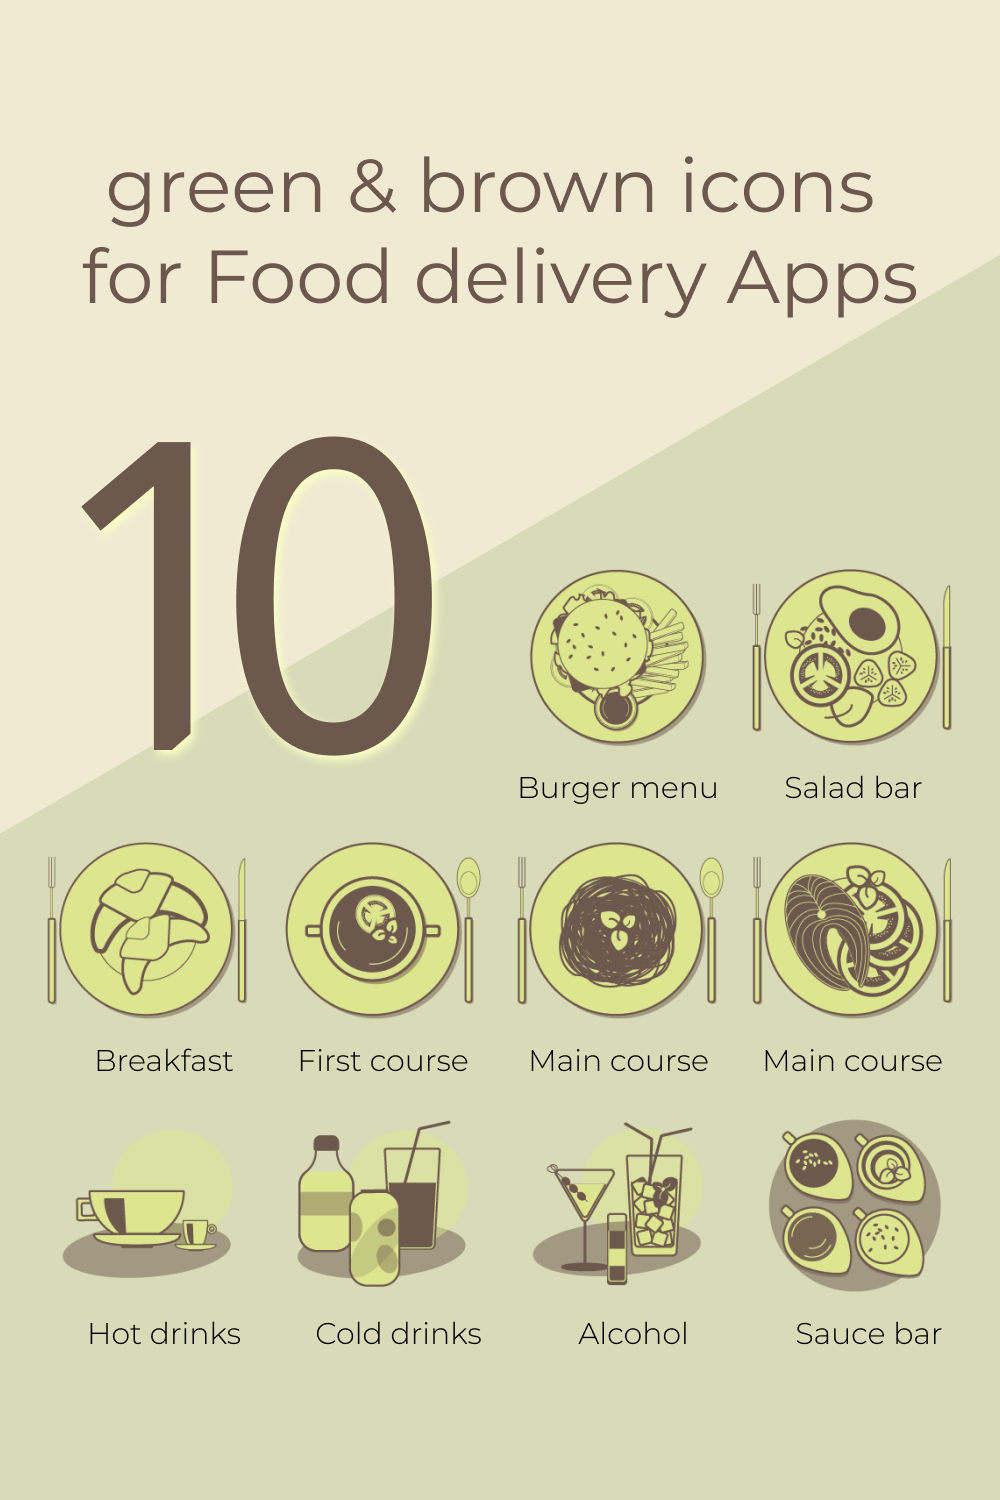 10 Food Icons For Your Apps Pinterest Image.